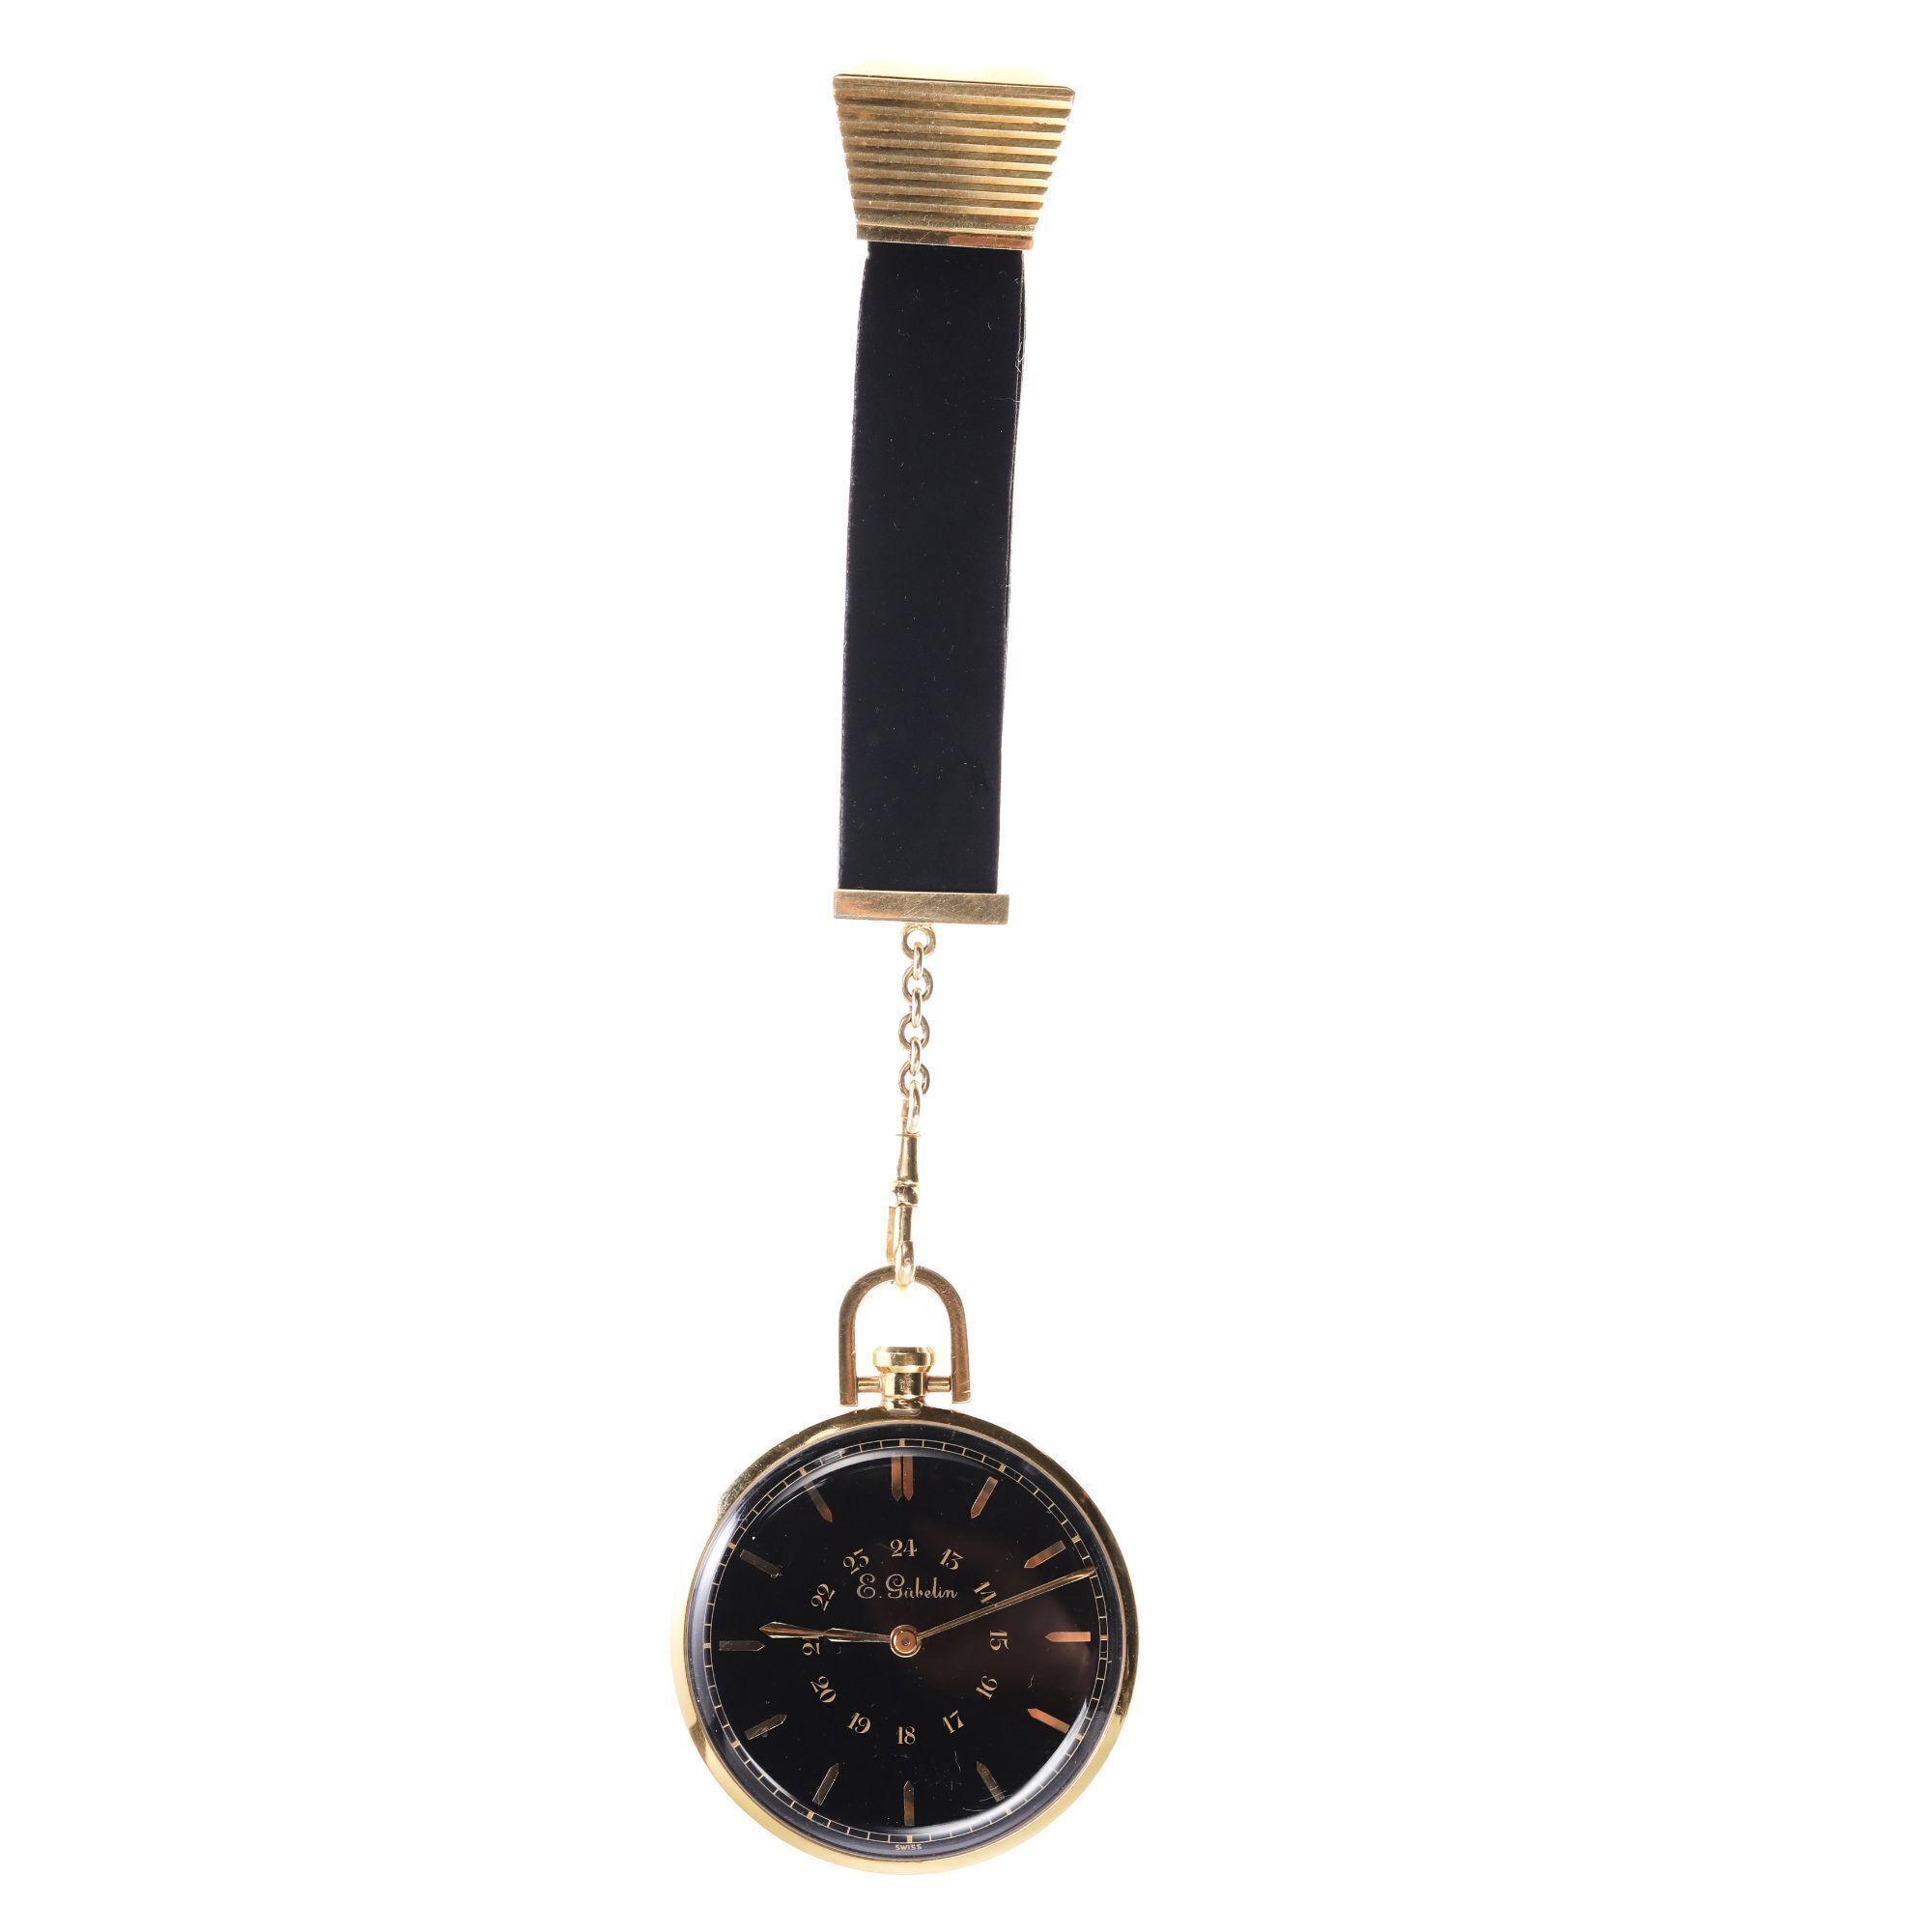 E. Gubelin 18K Yellow Gold Art Deco Men's Black Dial Dress Watch with Associated Gold and Black Suede Watch Fob